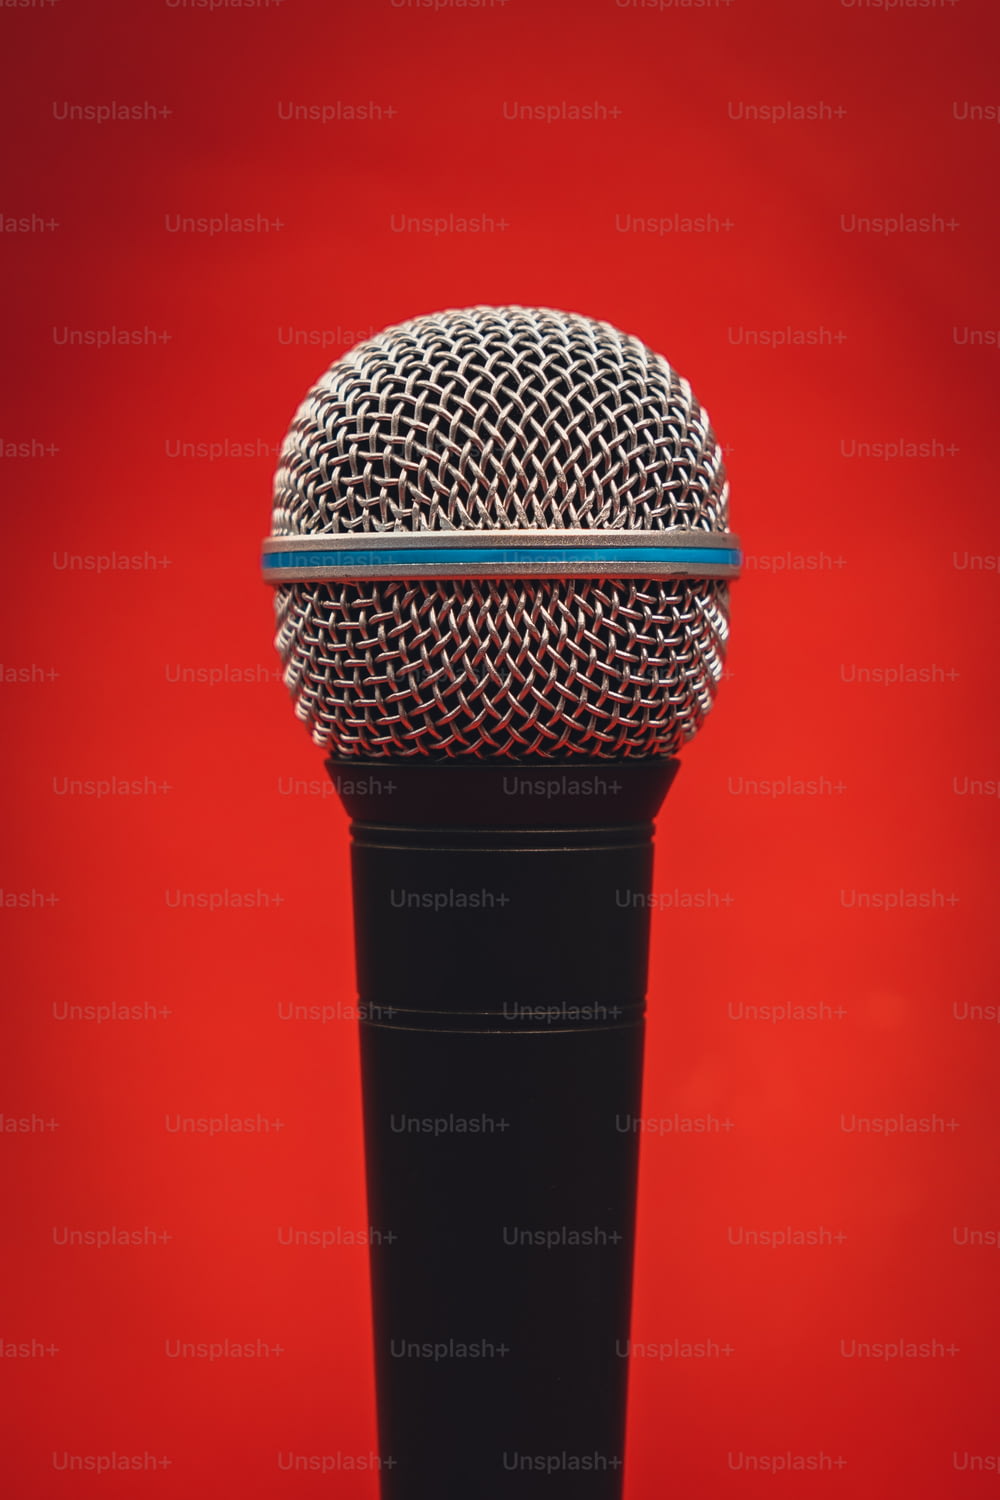 a microphone on a stand against a red background